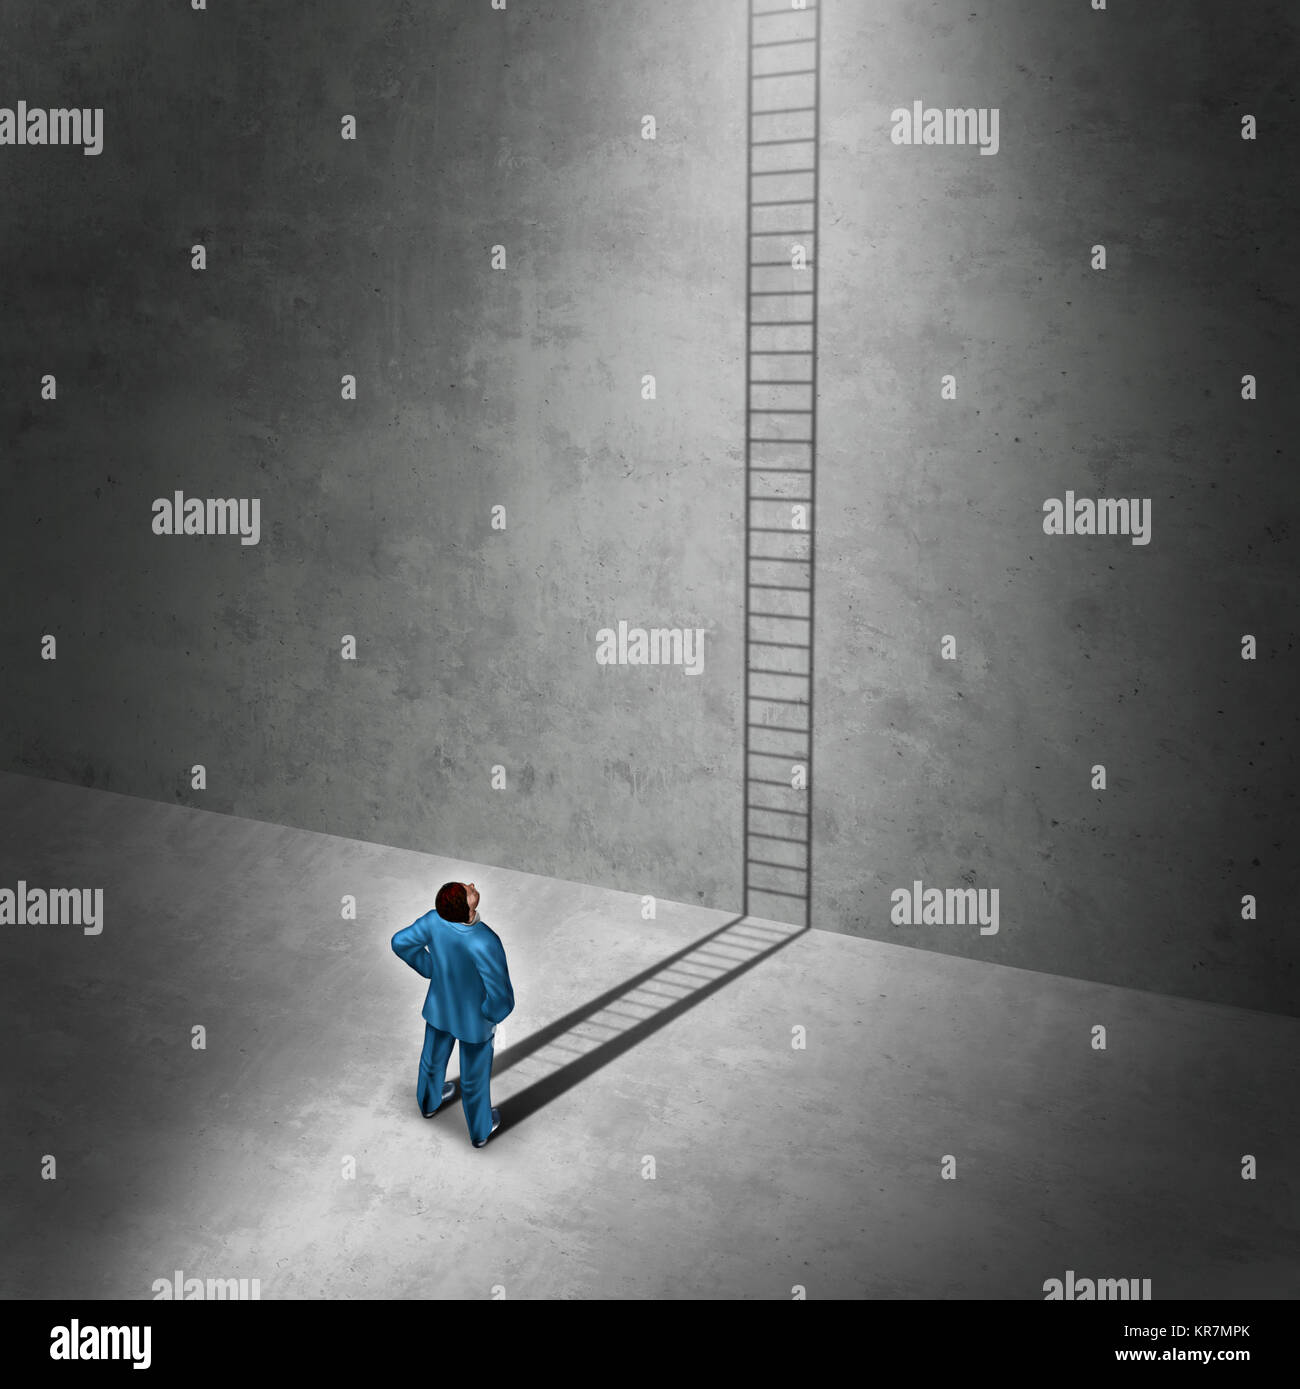 Visionary for solution success as a businessman casting a shadow of a ladder that climbs up the wall with 3D illustration elements. Stock Photo